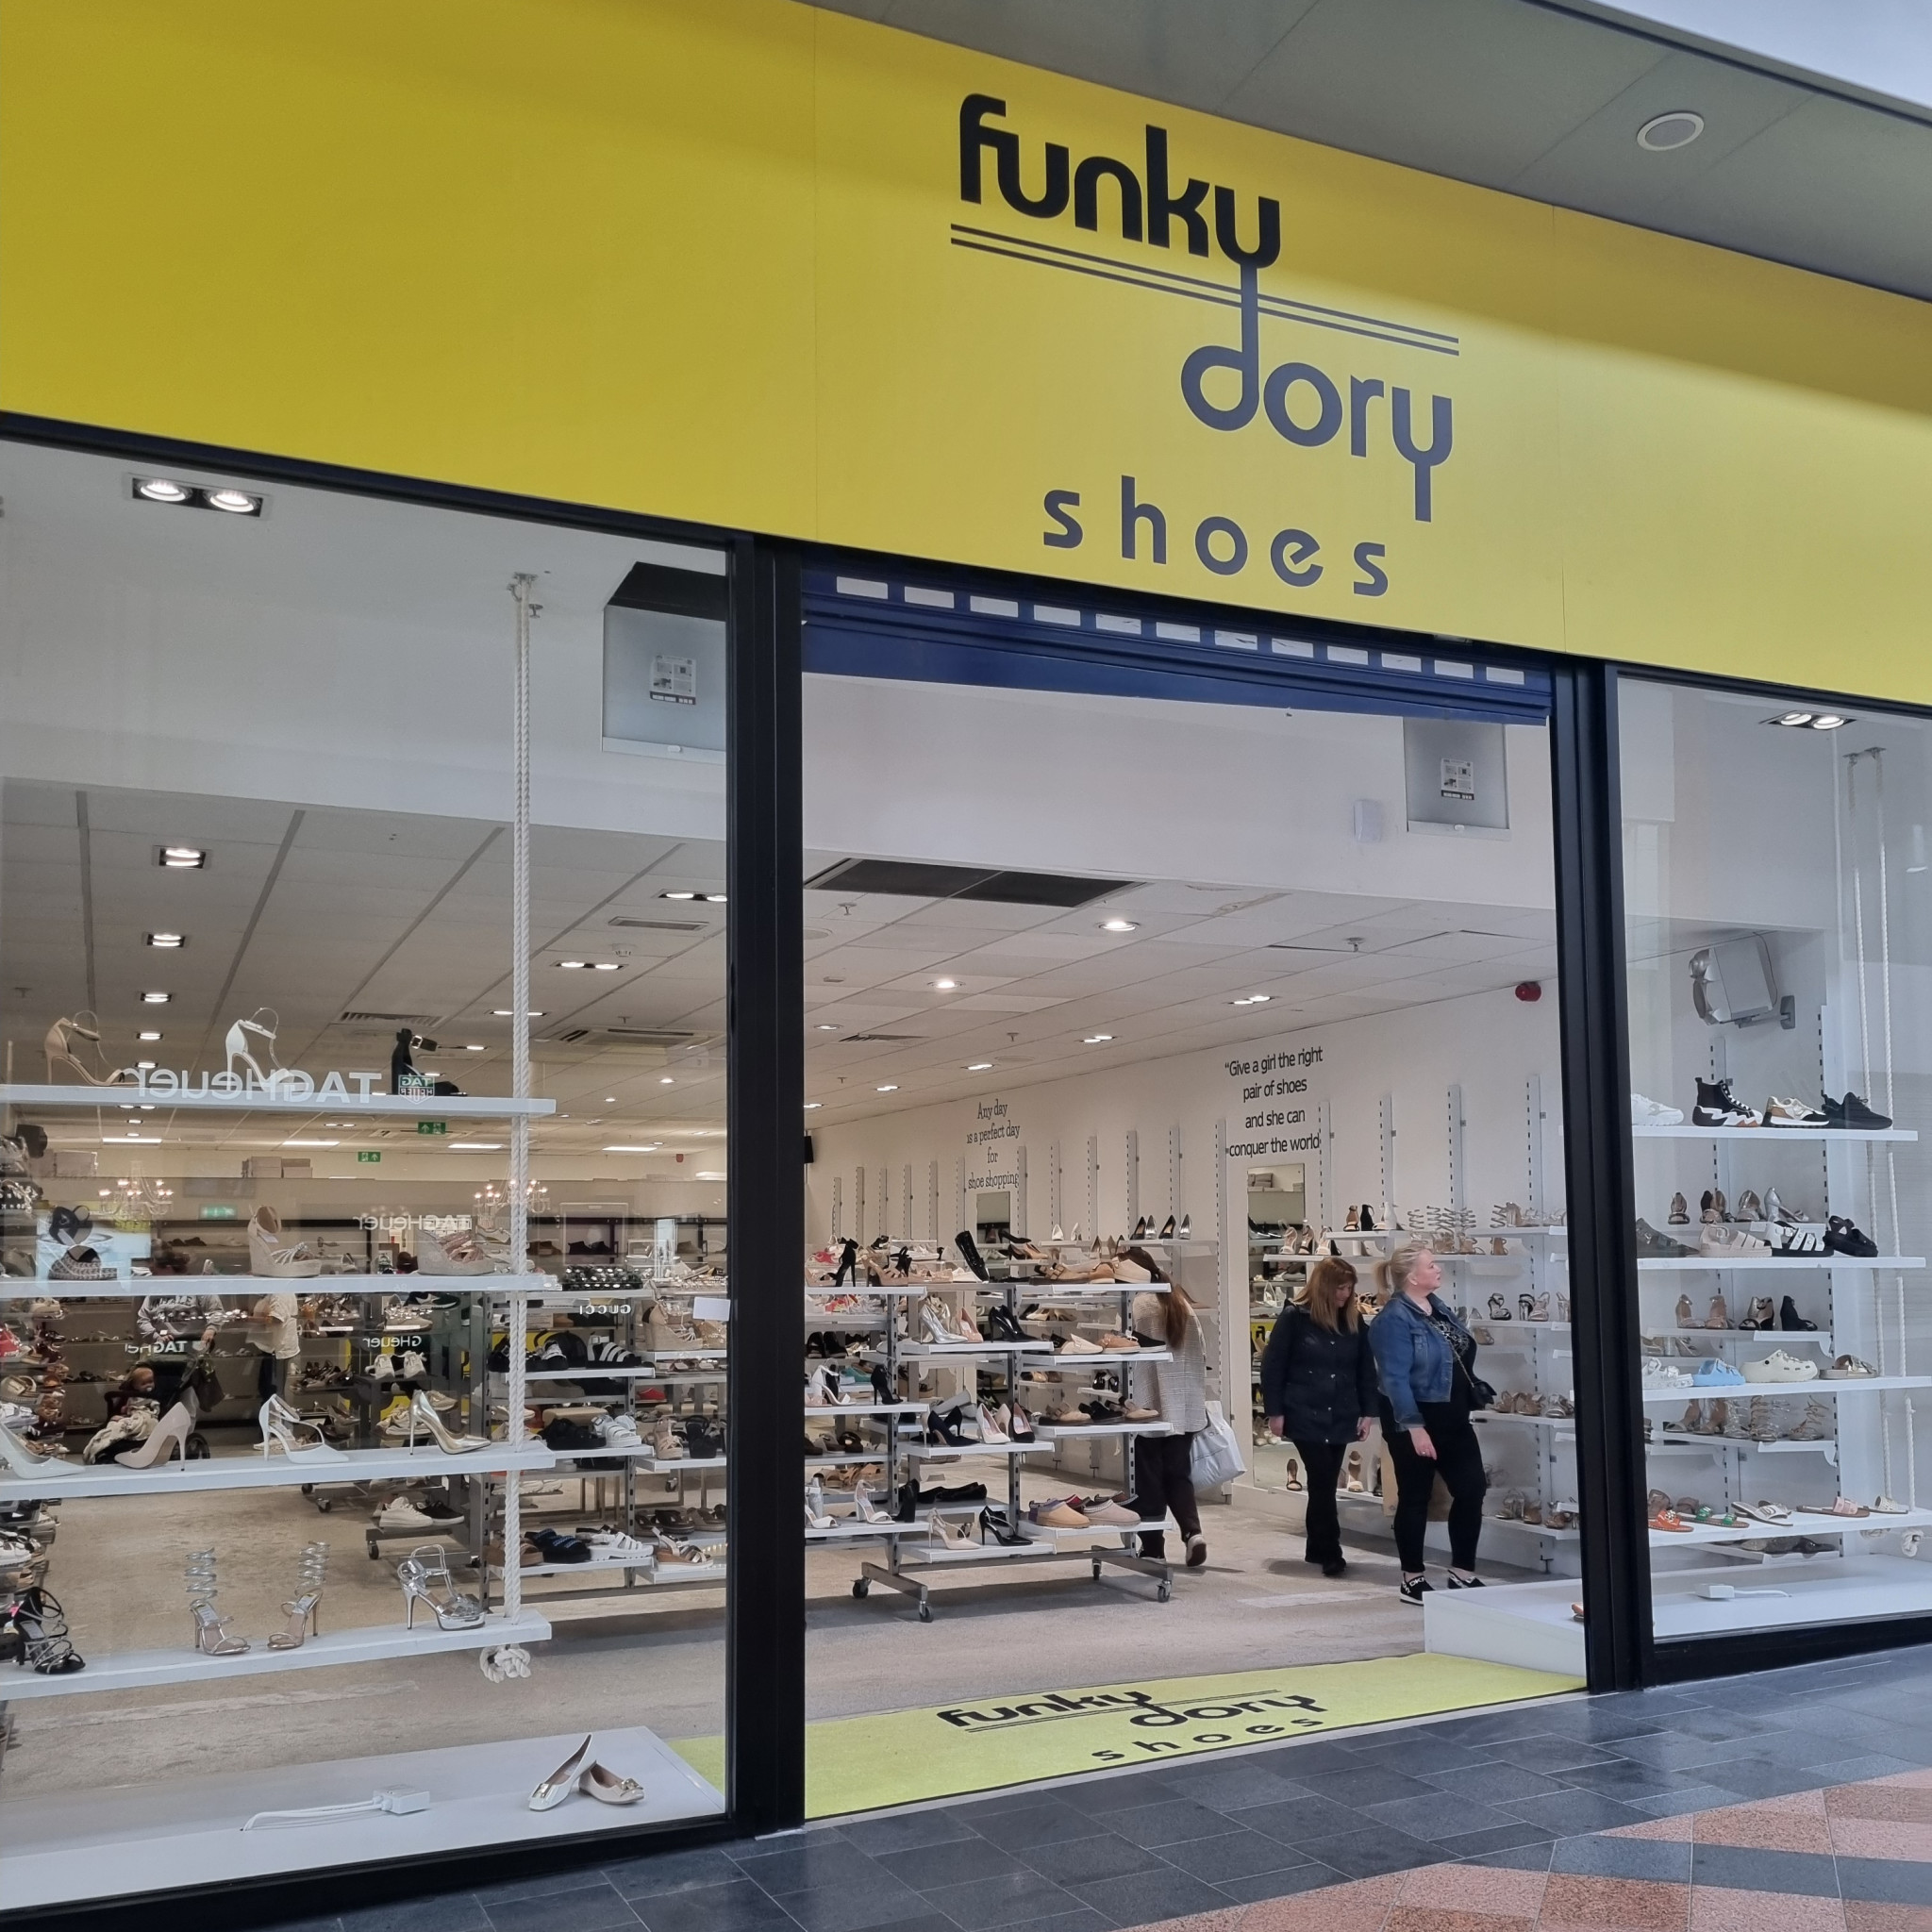 Funky Dory shoe store has reopened at Golden Square Shopping Centre